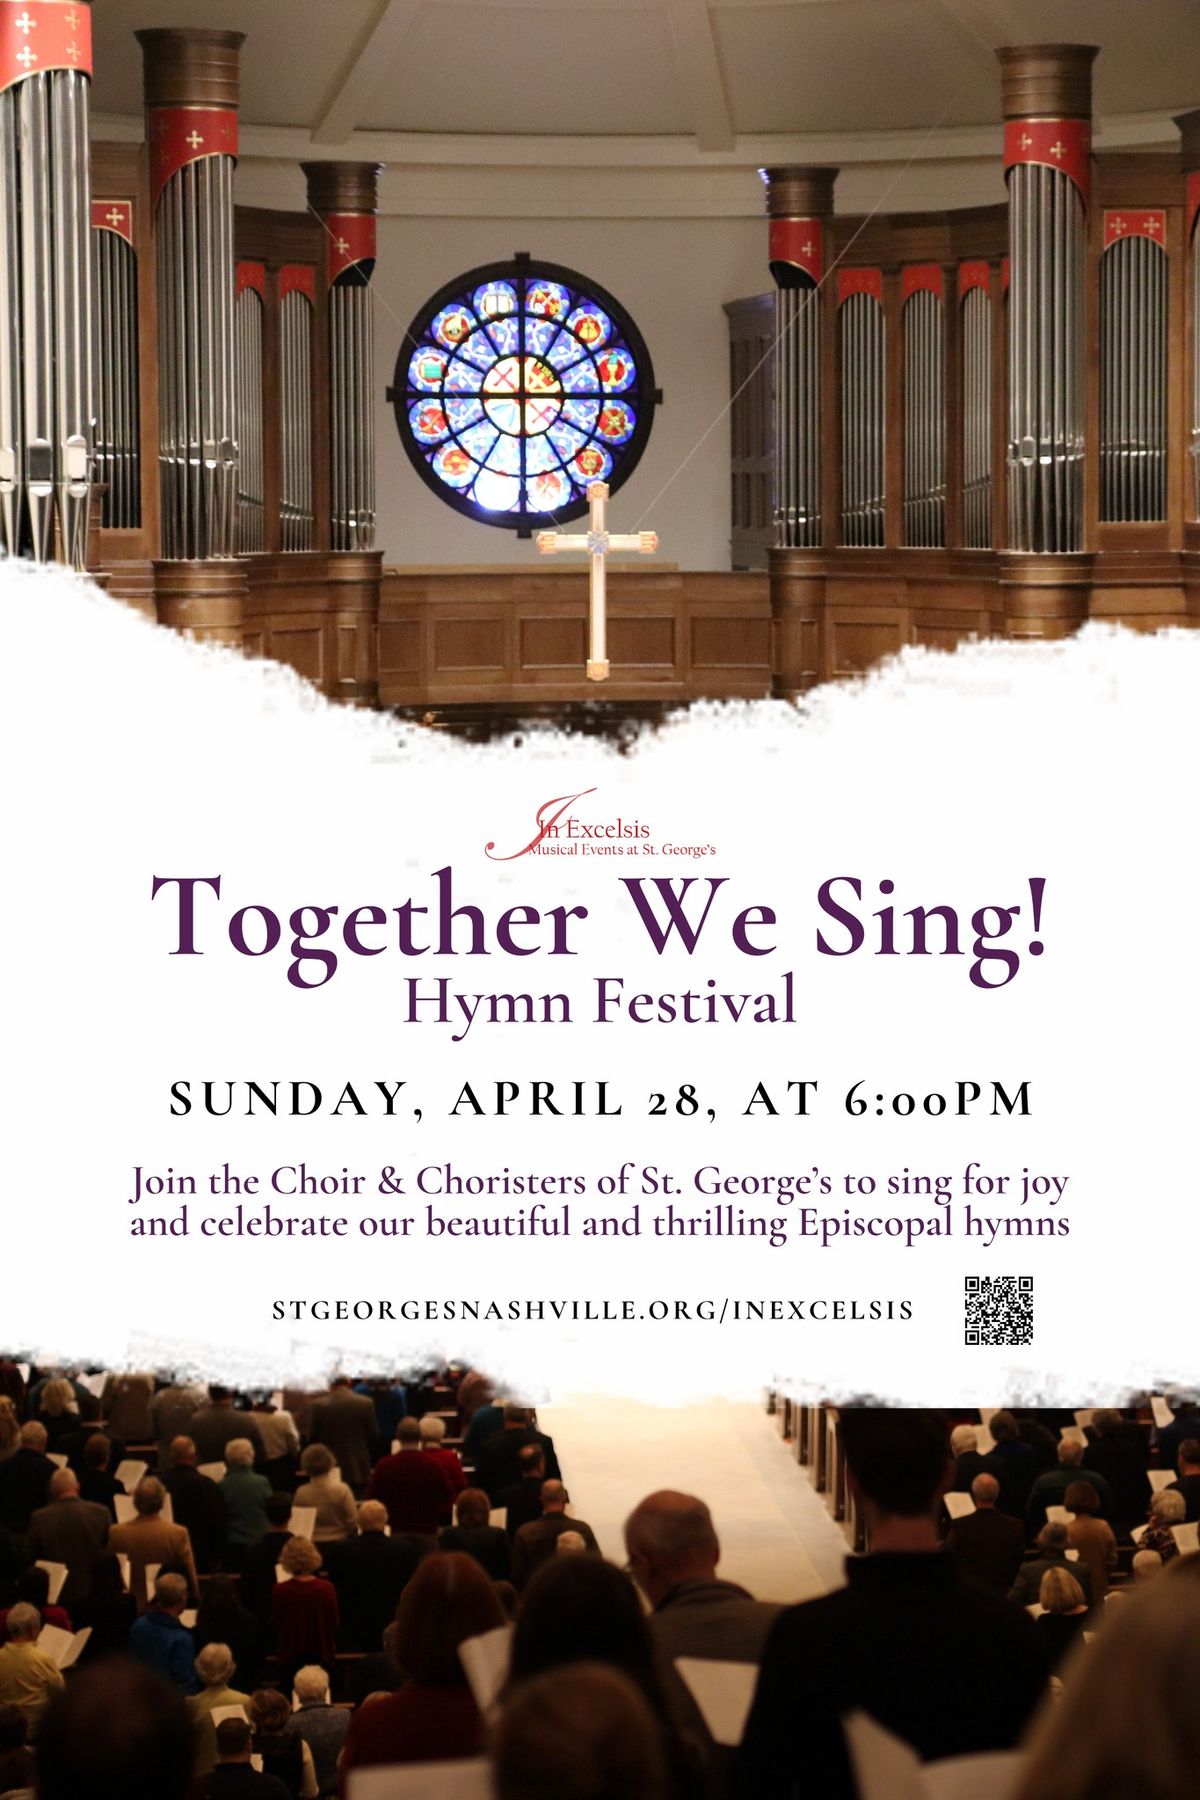 In Excelsis presents "Together We Sing!" Hymn Festival